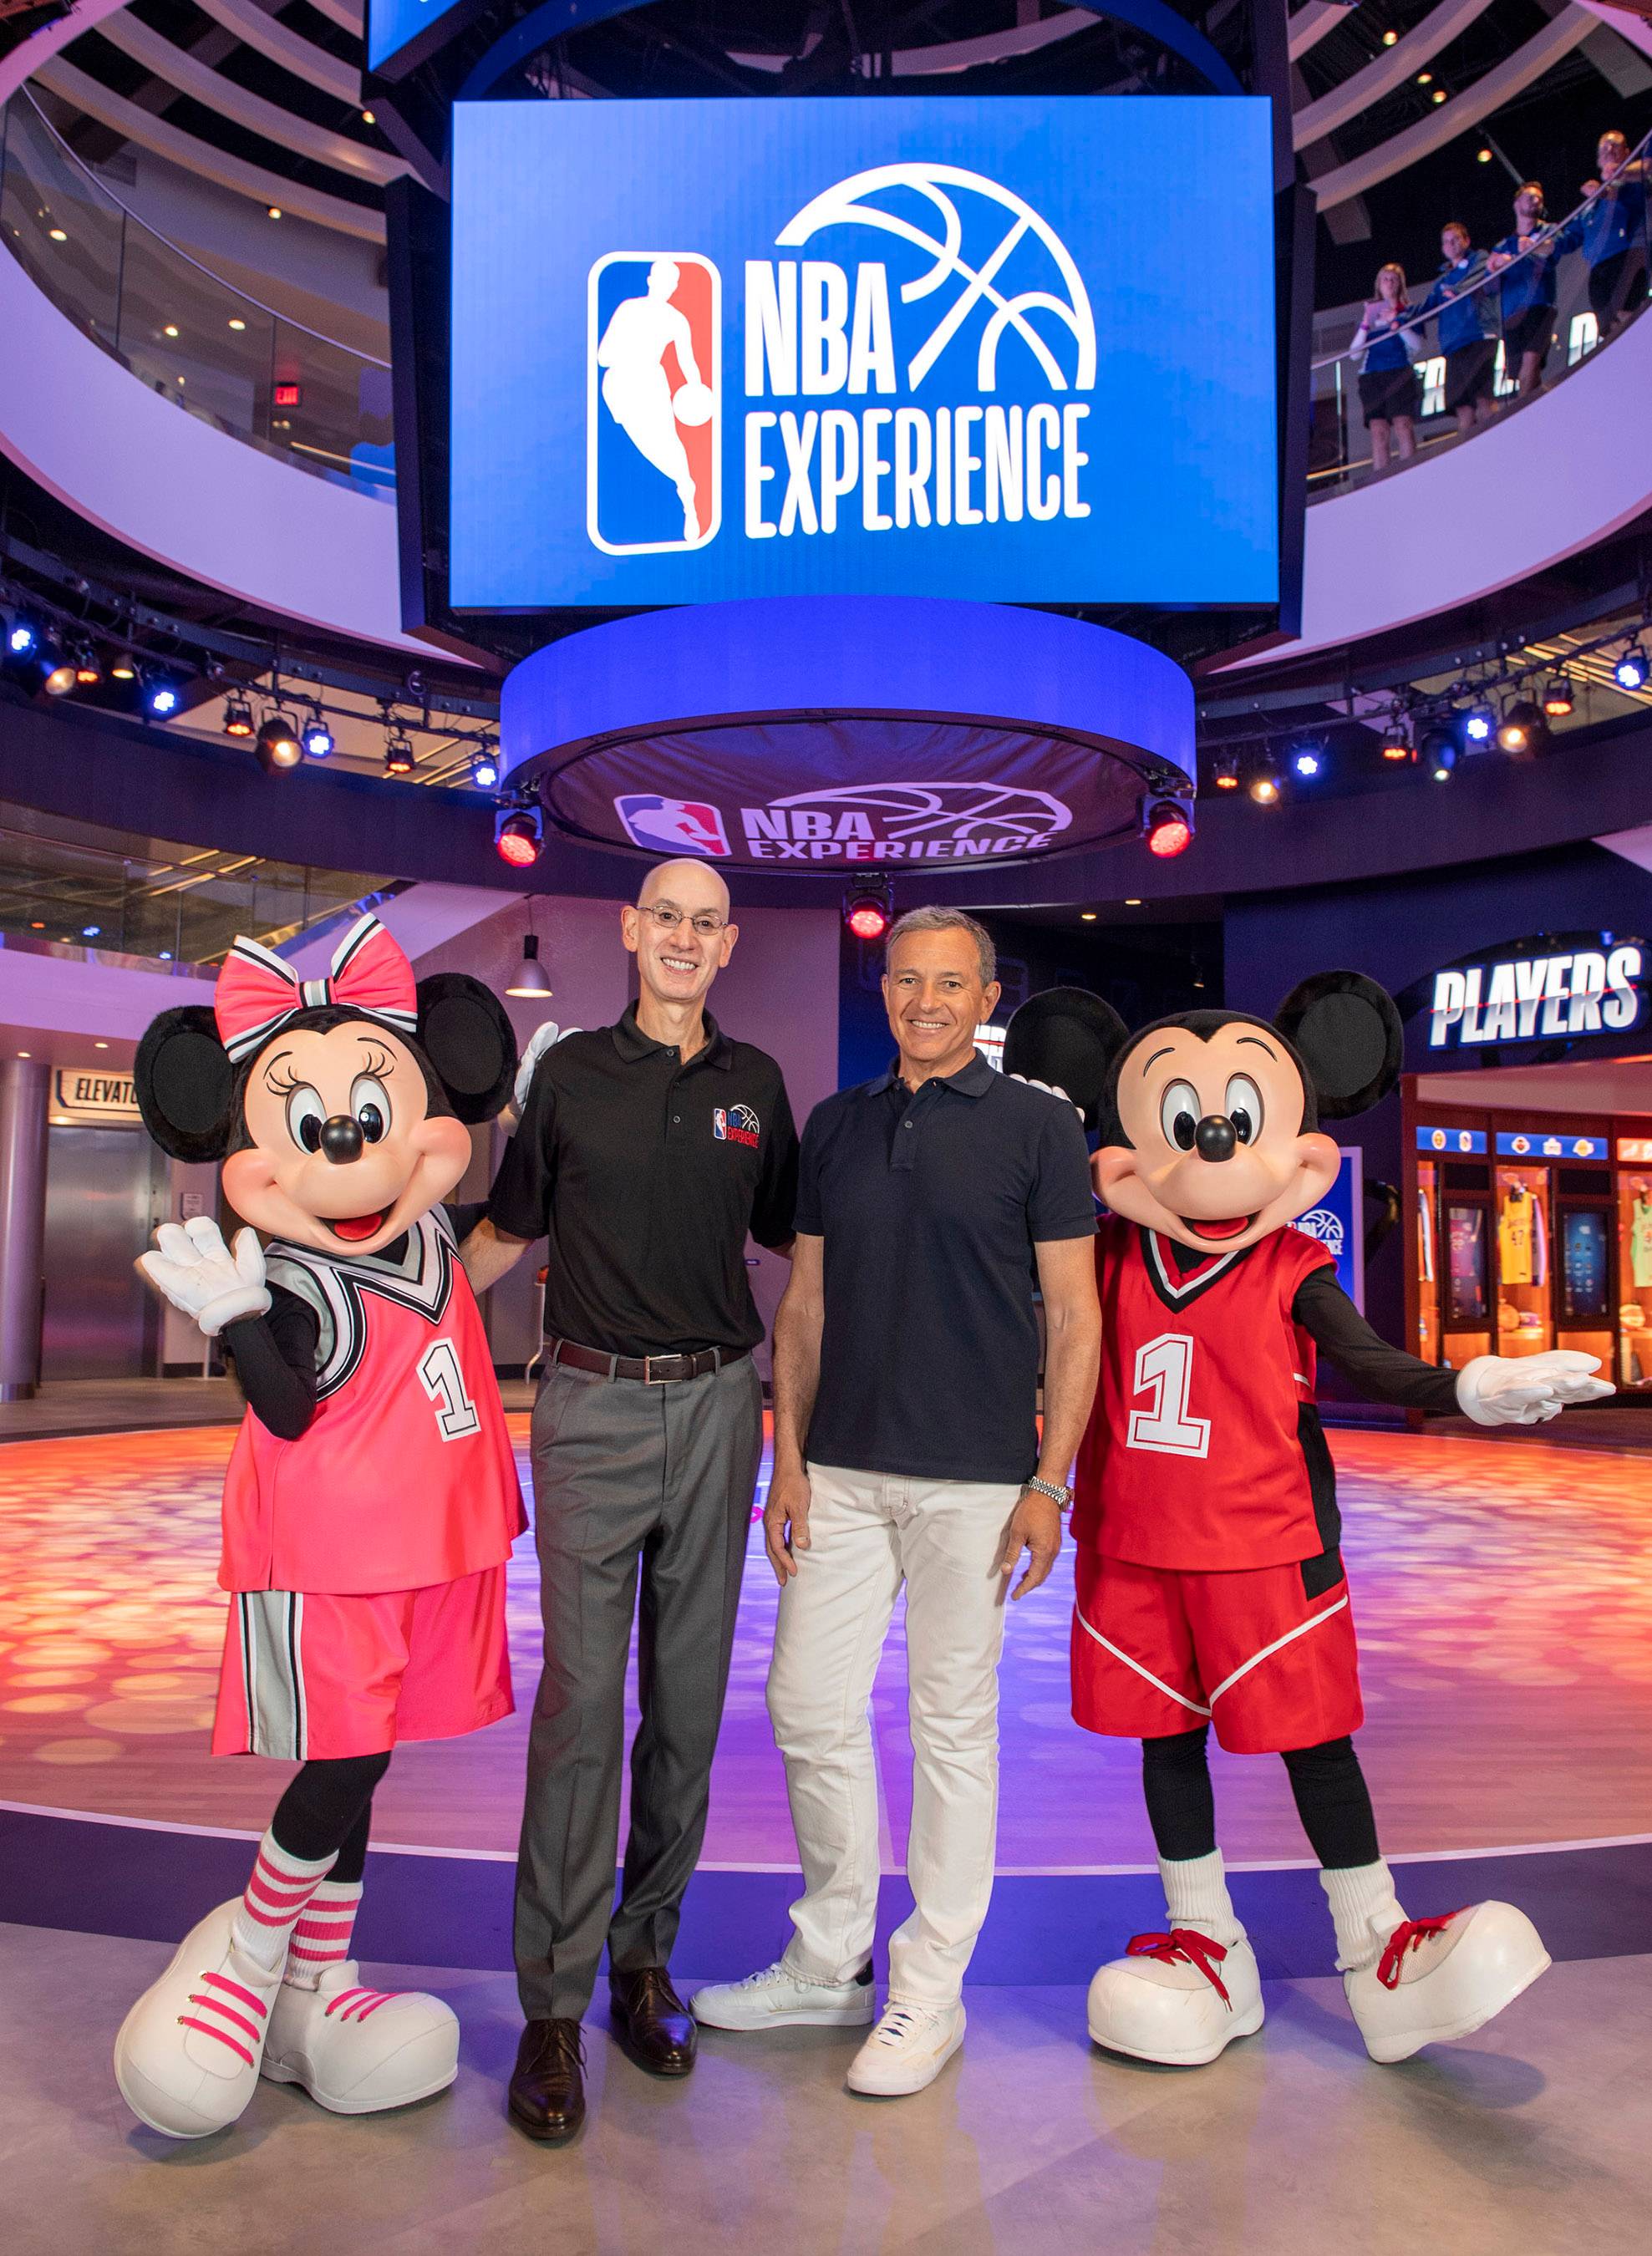 Right -&nbsp;Bob Iger, chairman and CEO of The Walt Disney Company. Left - NBA Commissioner Adam Silver